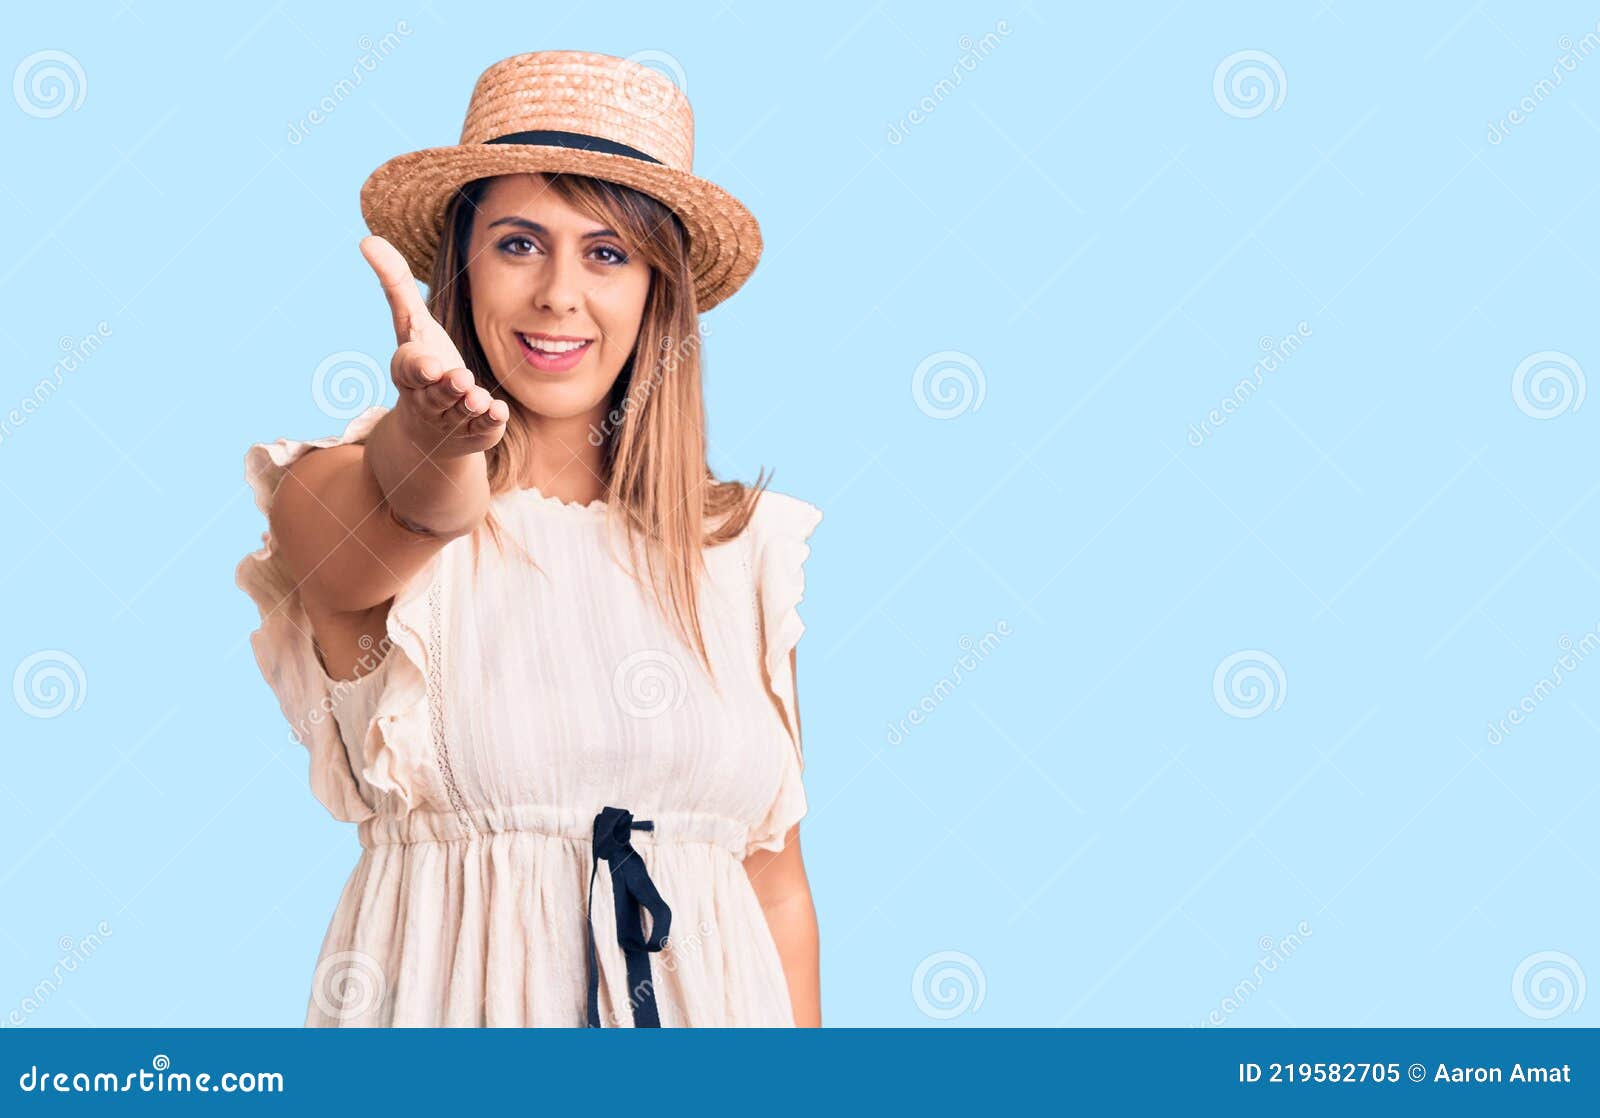 young beautiful woman wearing summer hat and t-shirt smiling friendly offering handshake as greeting and welcoming